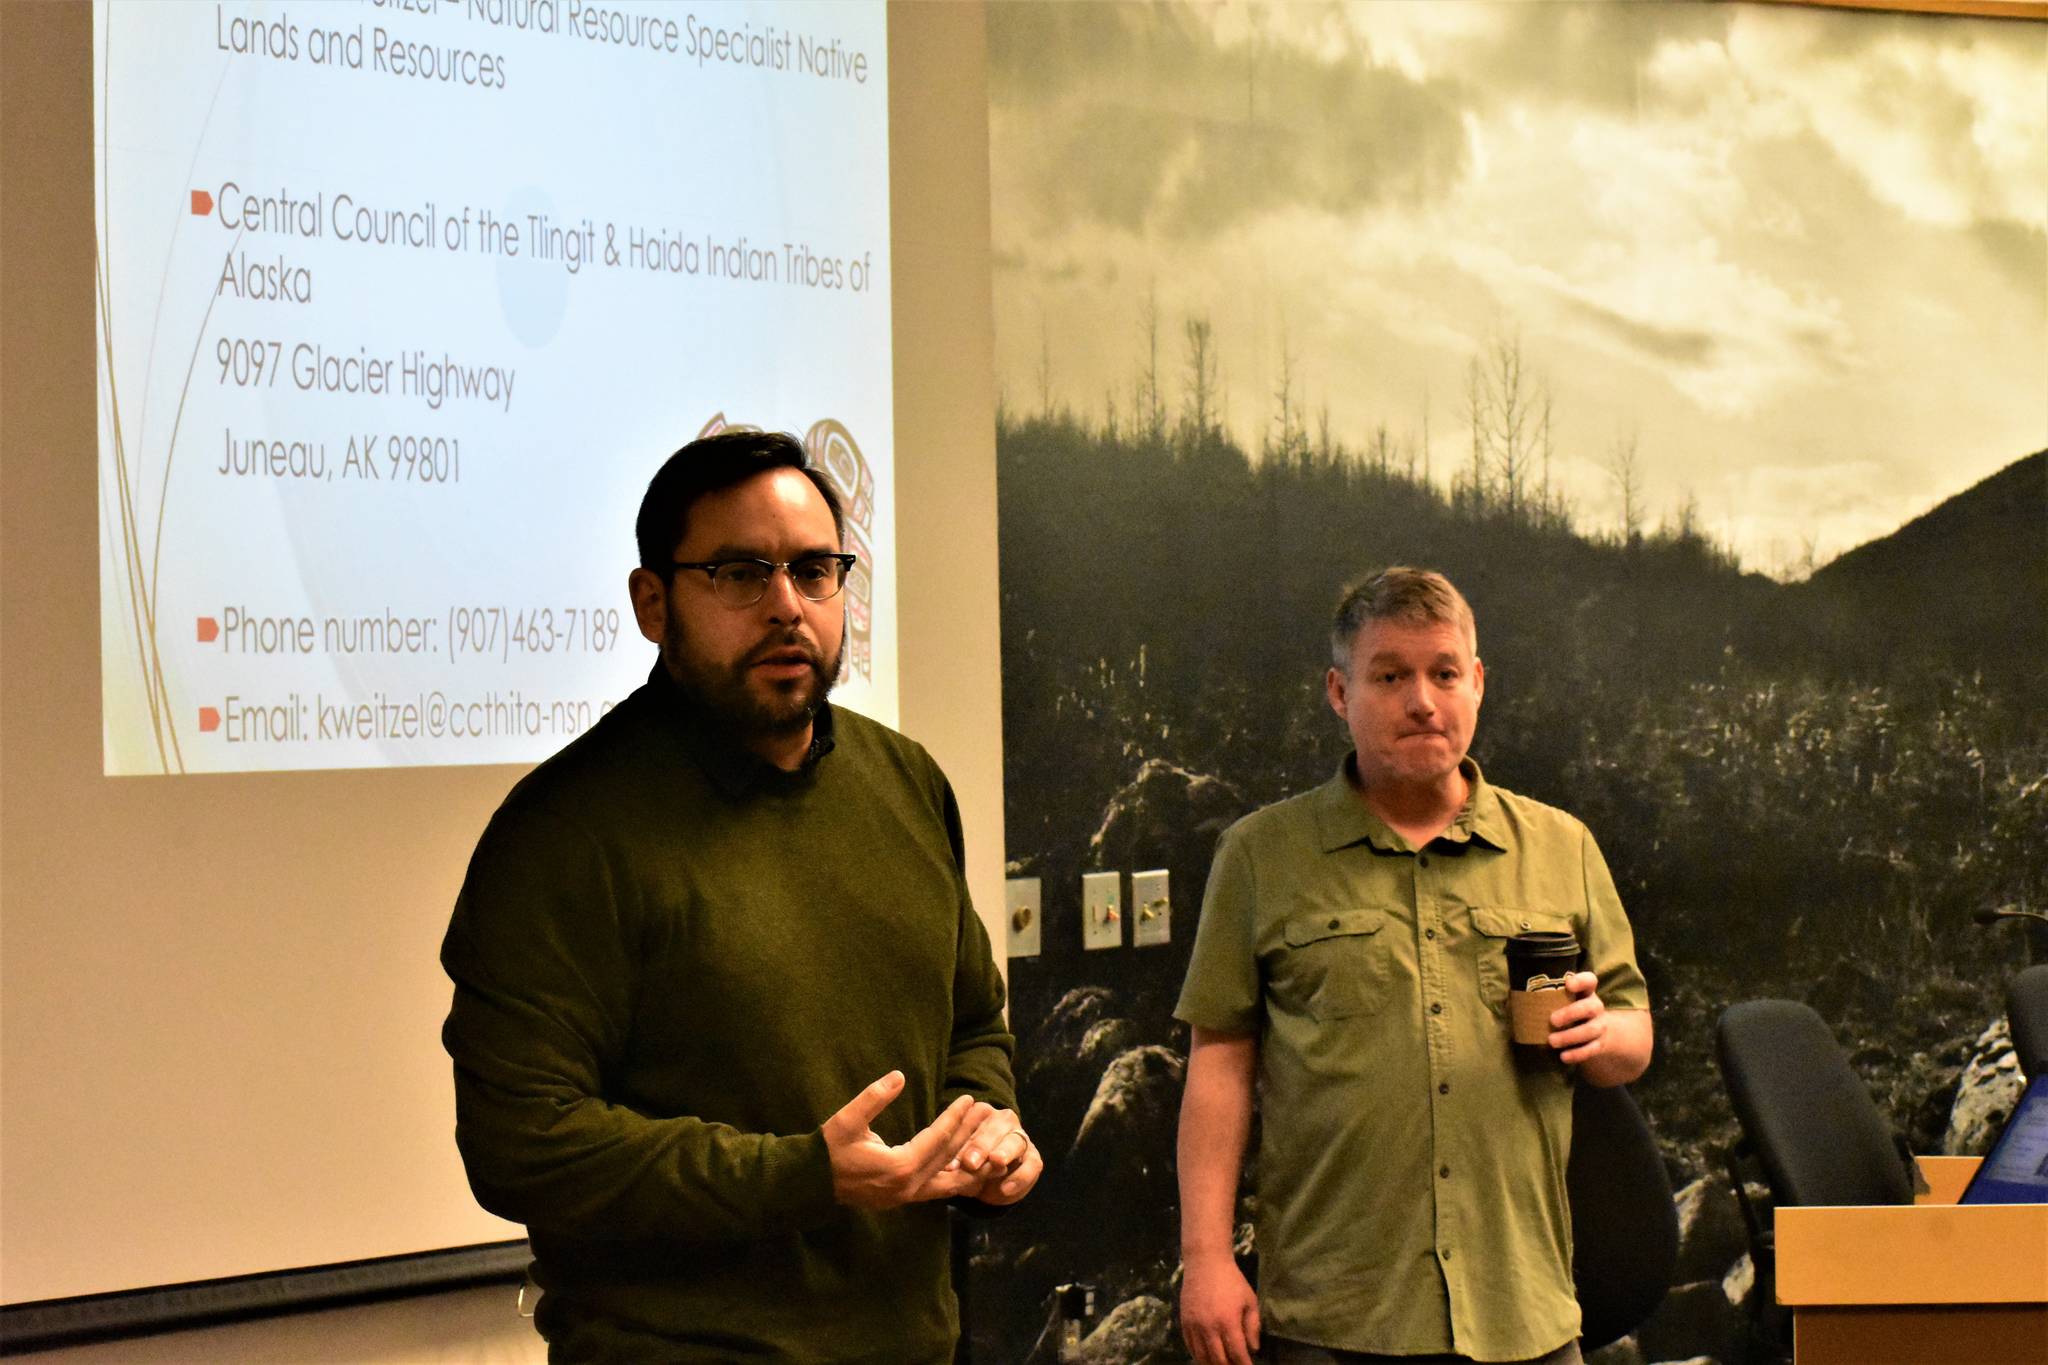 Raymond Paddok, left, and Kenneth Weitzel of Central Council of the Tlingit & Haida Indian Tribes of Alaska, present on the Climate Change Adaptation Plan on Wednesday, Oct. 30, 2019. (Peter Segall | Juneau Empire)